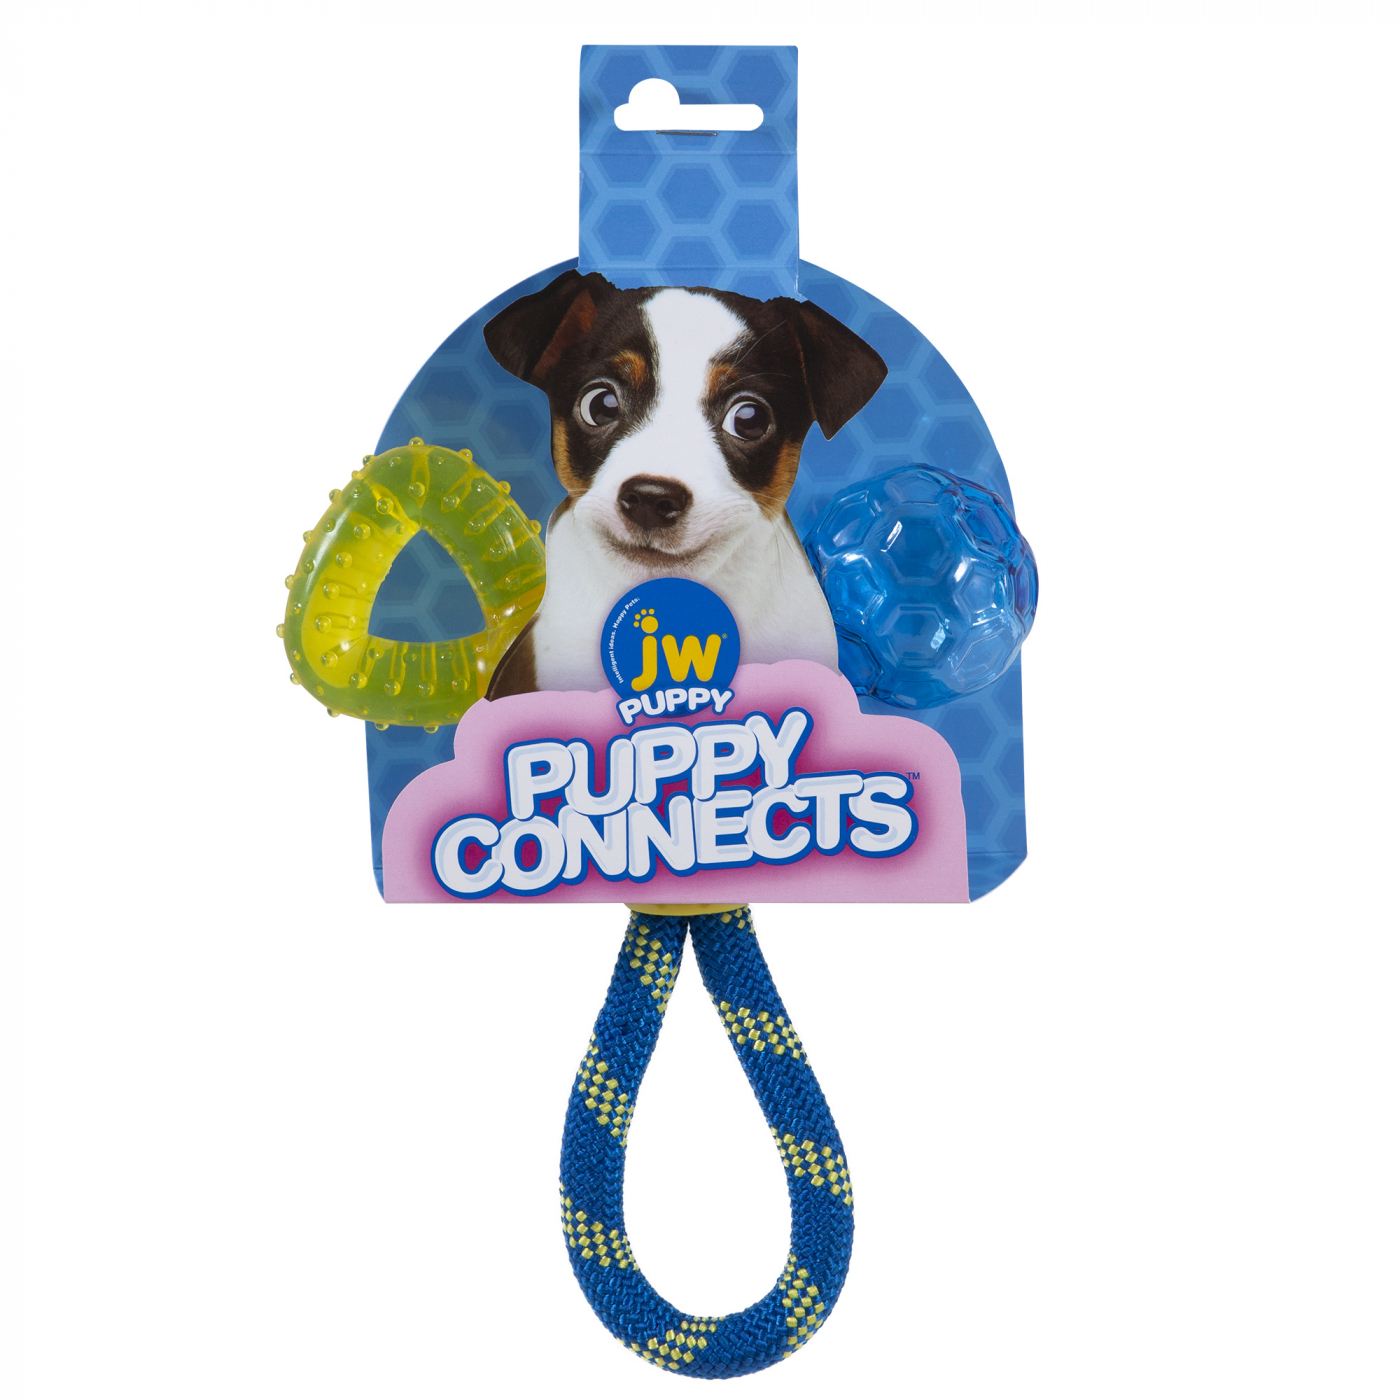 JW PUPPY CONNECTS